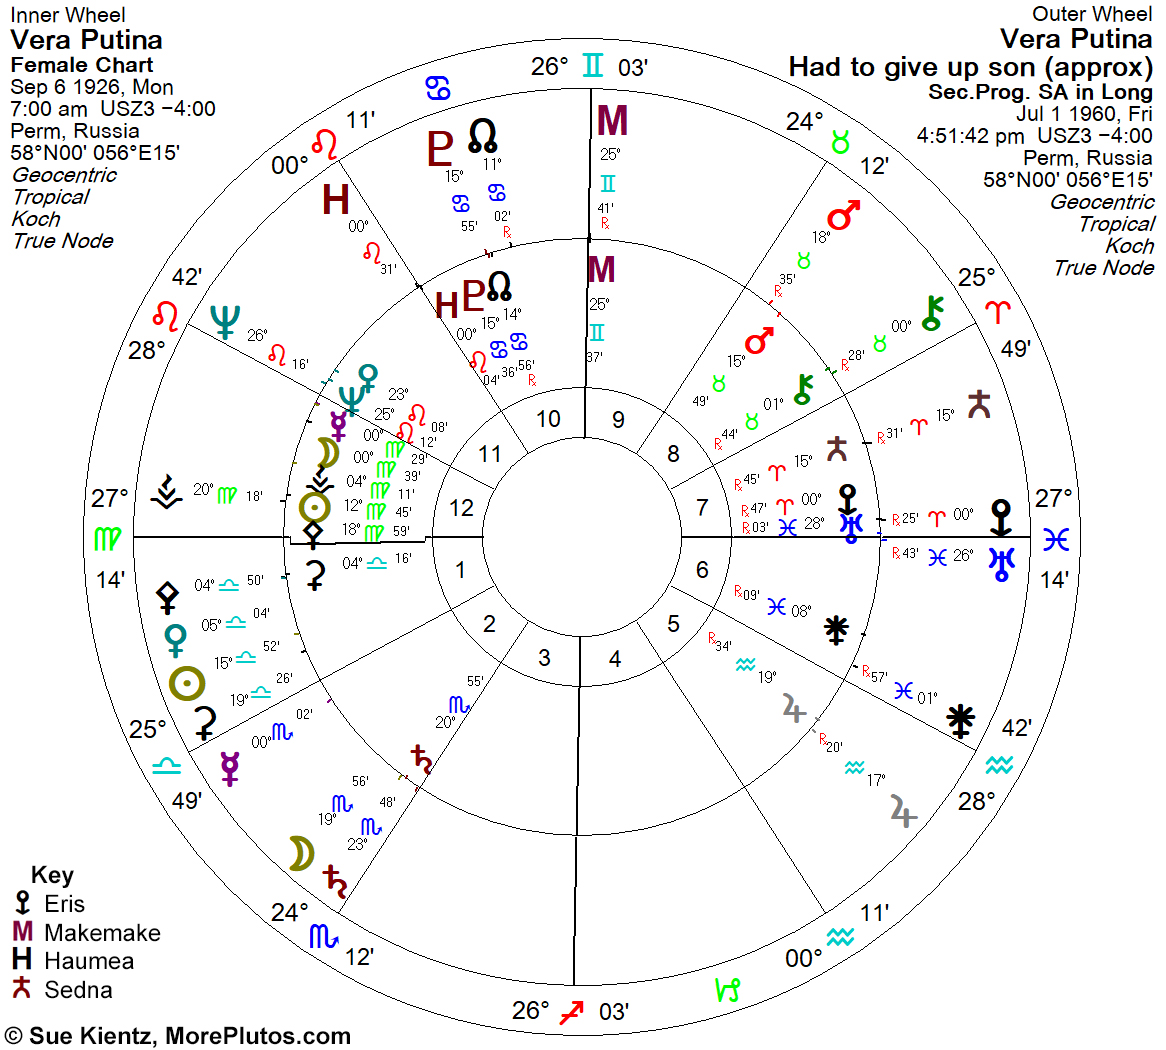 Biwheel chart showing Vera Putina natal (inner) and secondary progression to summer 1960 when she had to give her son up (outer)